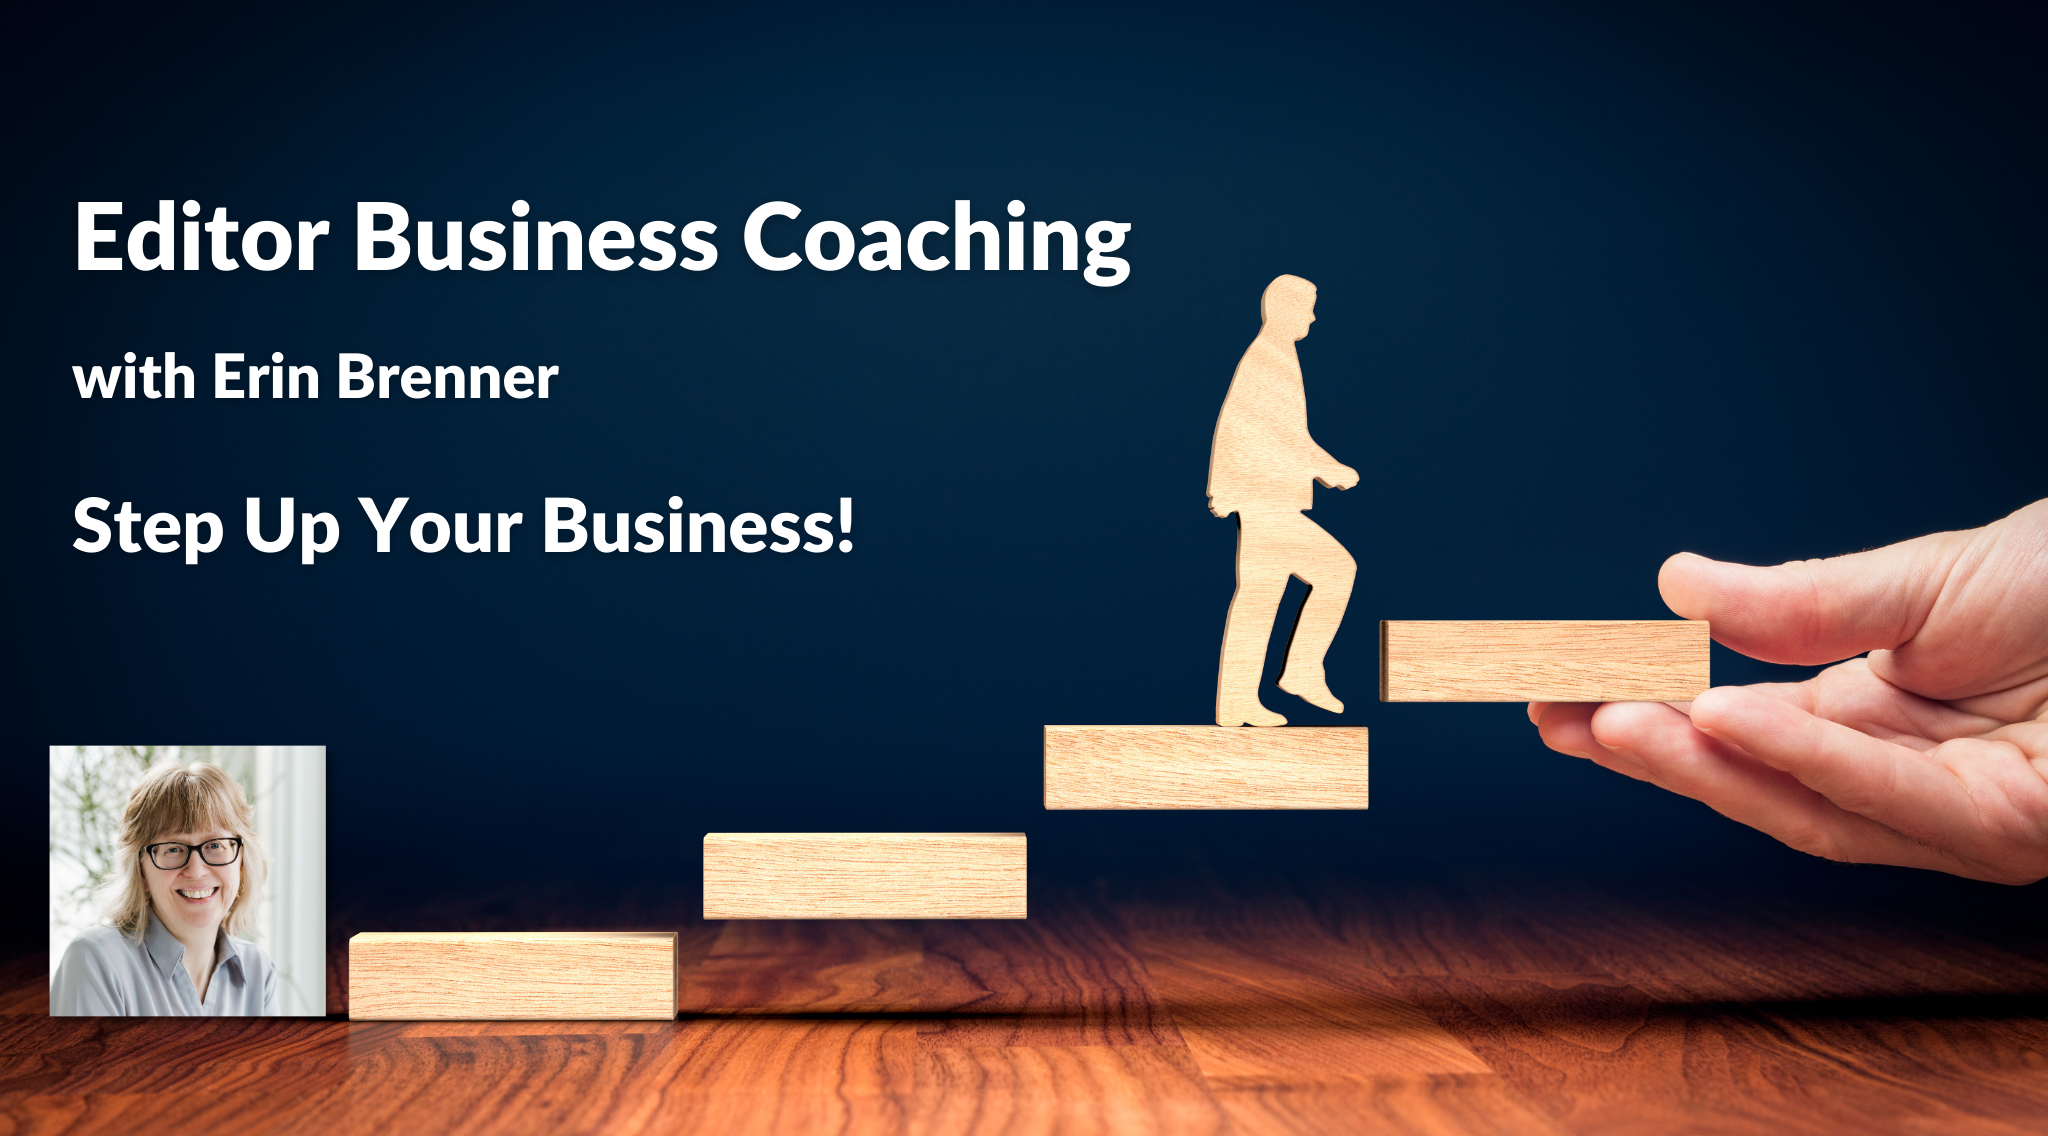 Editor Business Coaching with Erin Brenner: Step Up Your Business